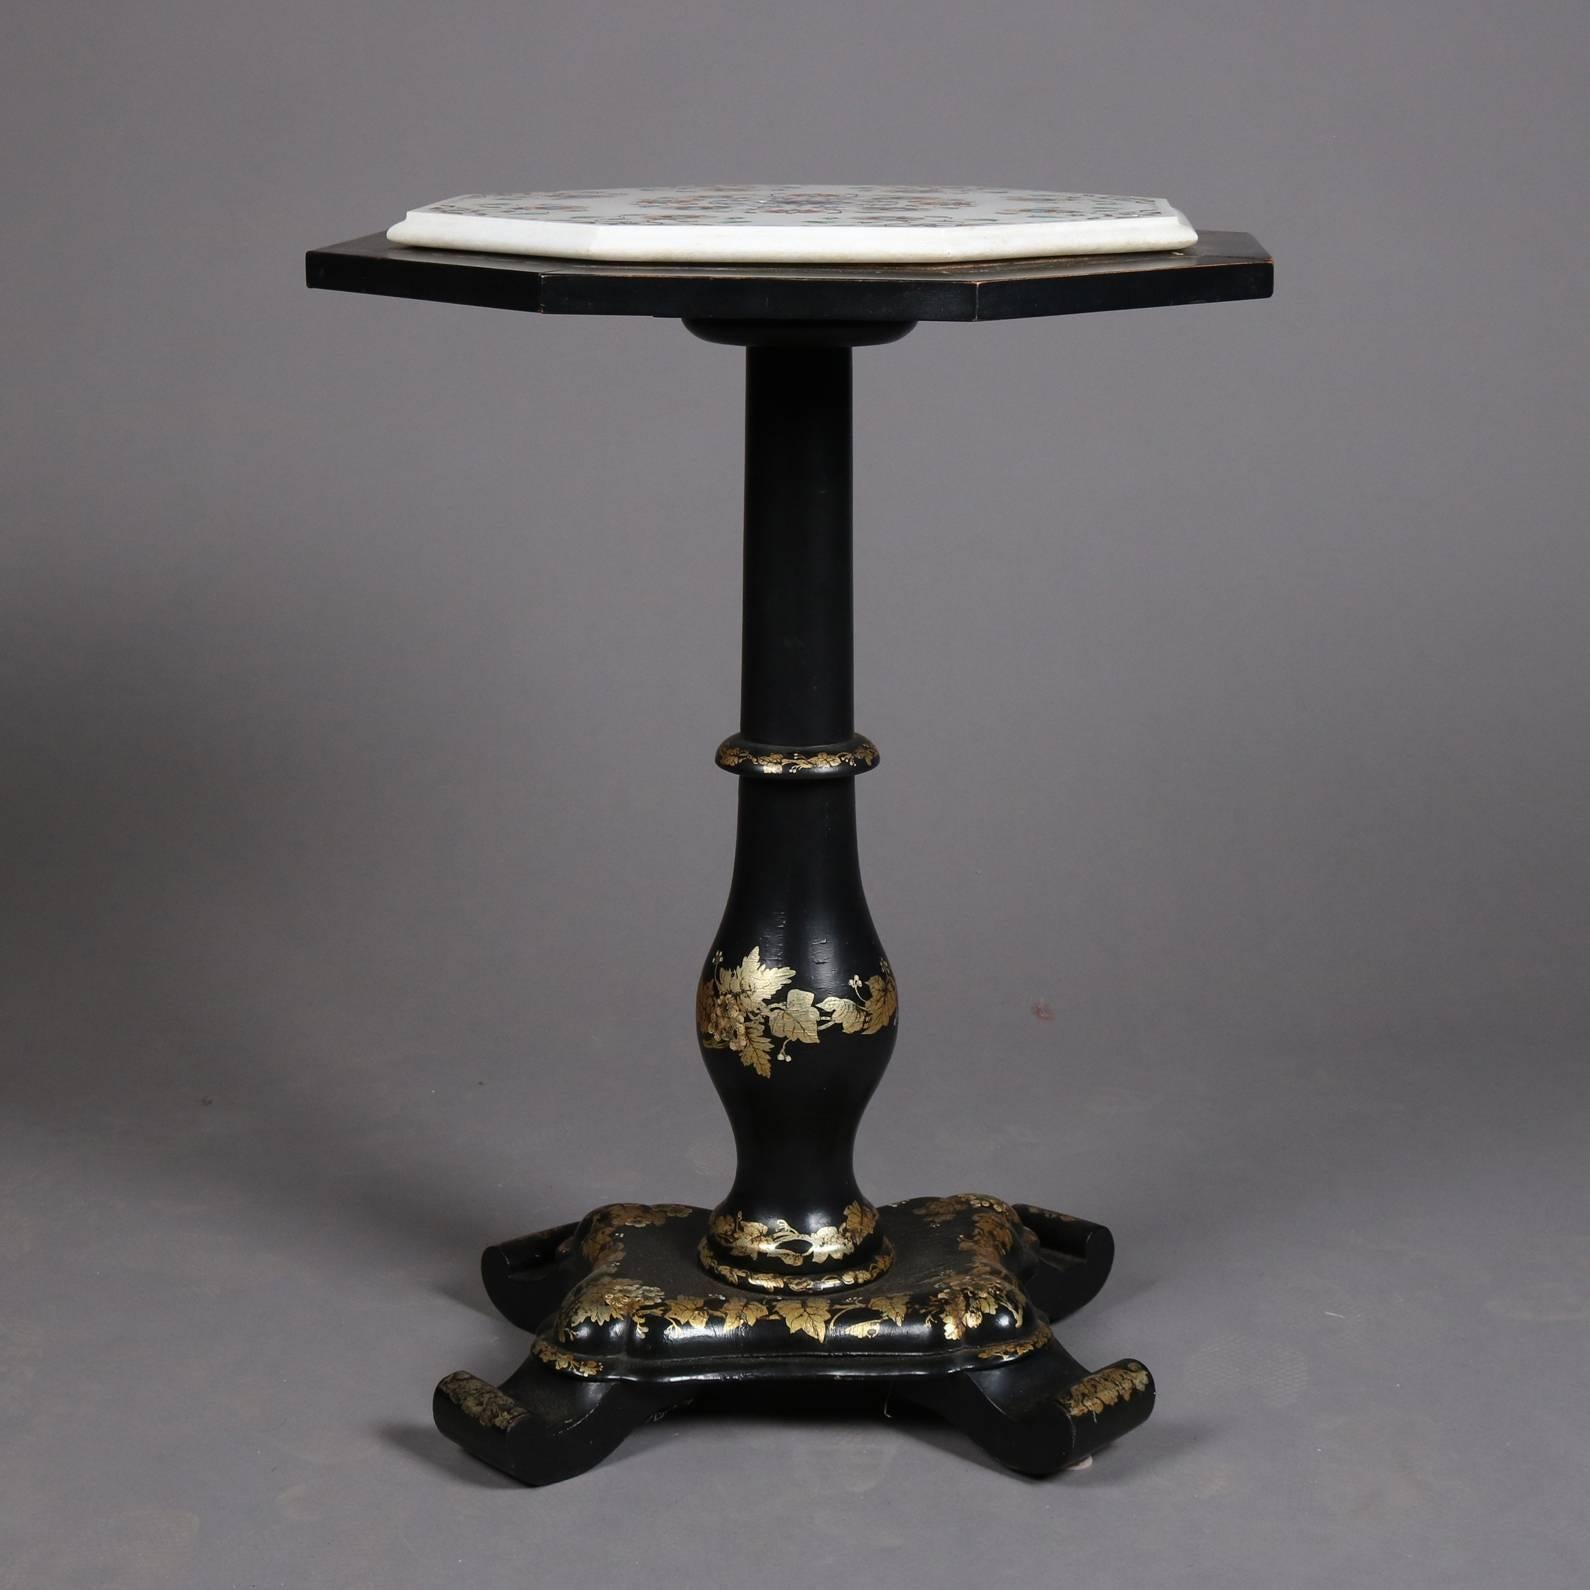 Antique ebonized Stand features grape vine gilt decoration, scroll feet, and marble top with mother-of-pearl and shell floral mosaic, replacement top, 19th century

Measures: 26.25